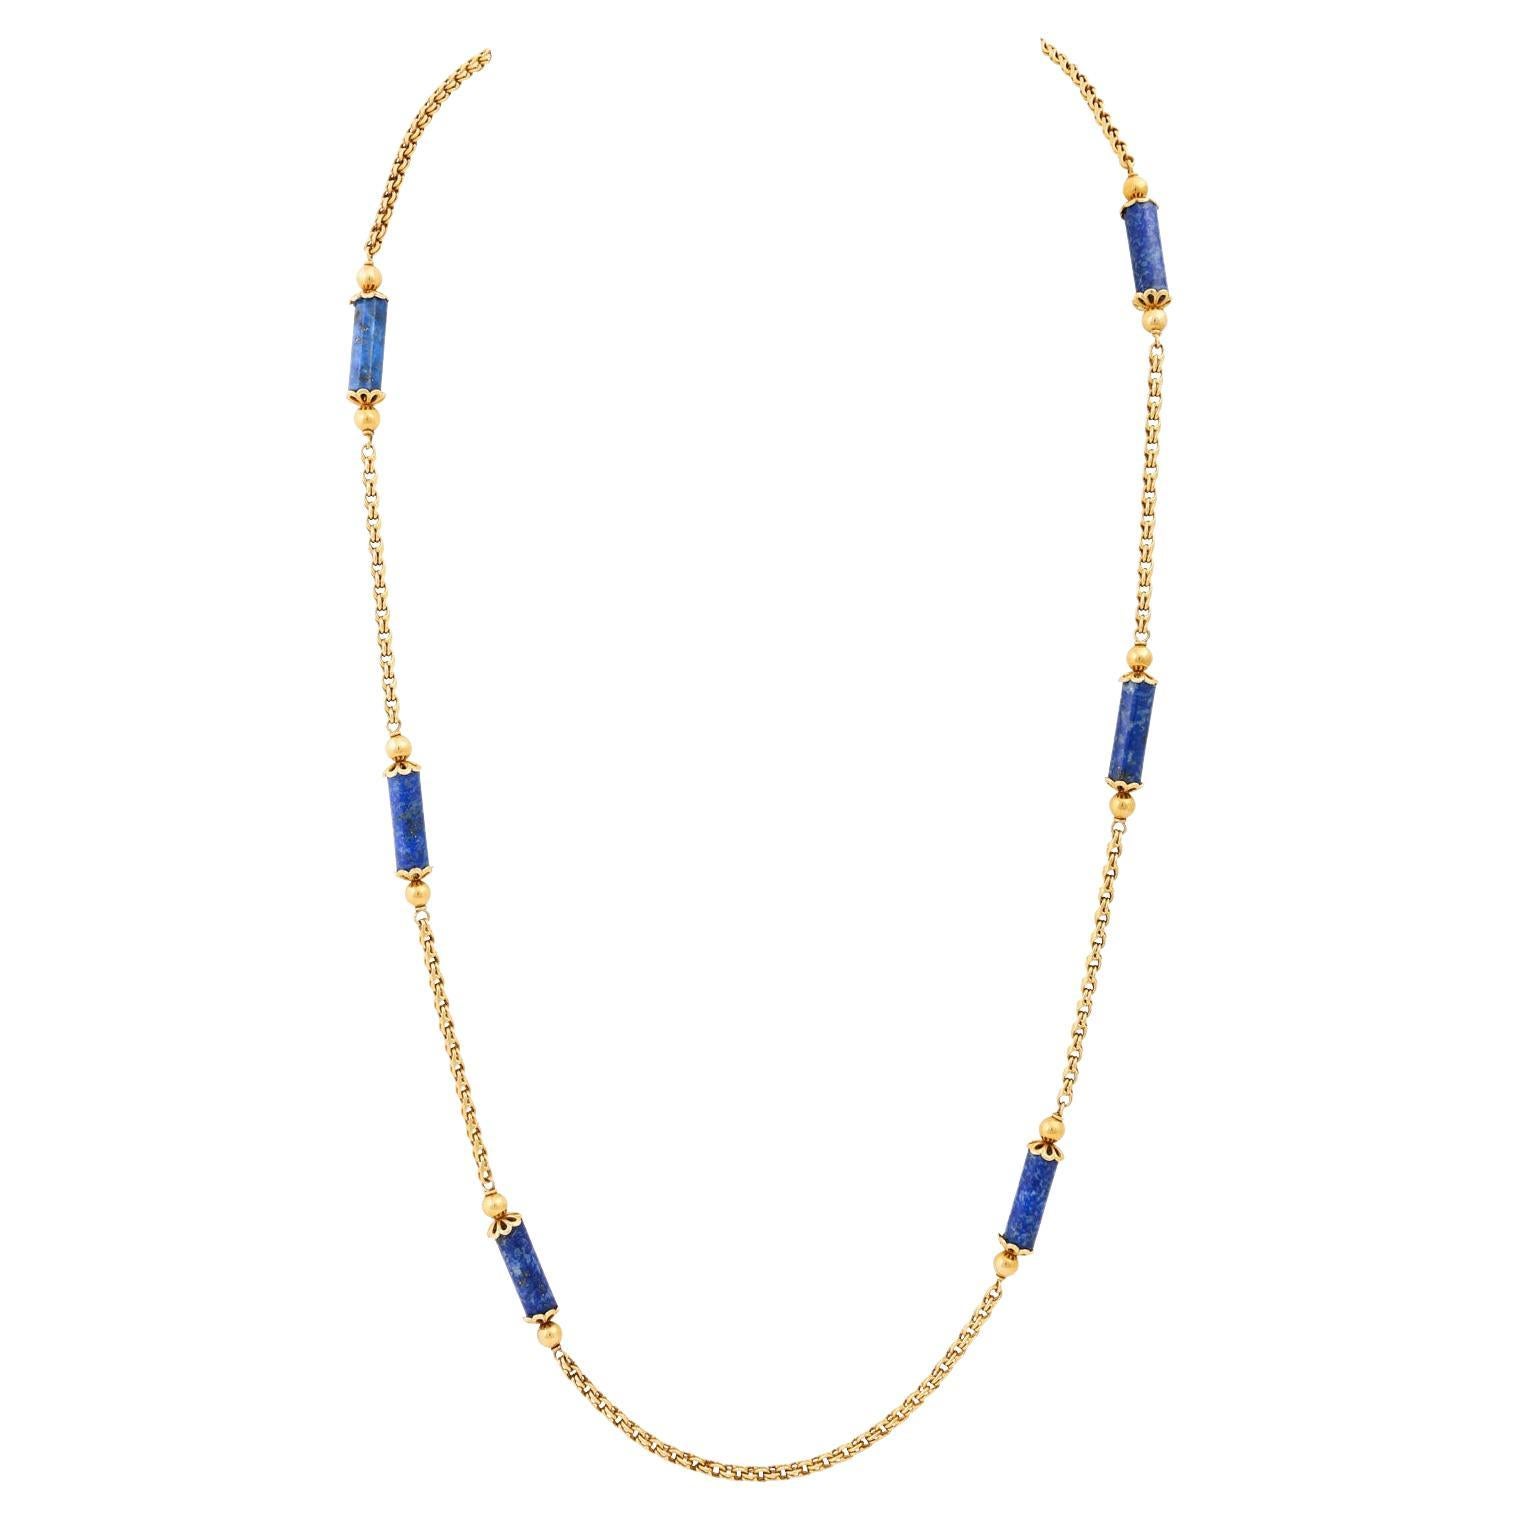 Long chain with 5 lapis lazuli elements, For Sale at 1stDibs